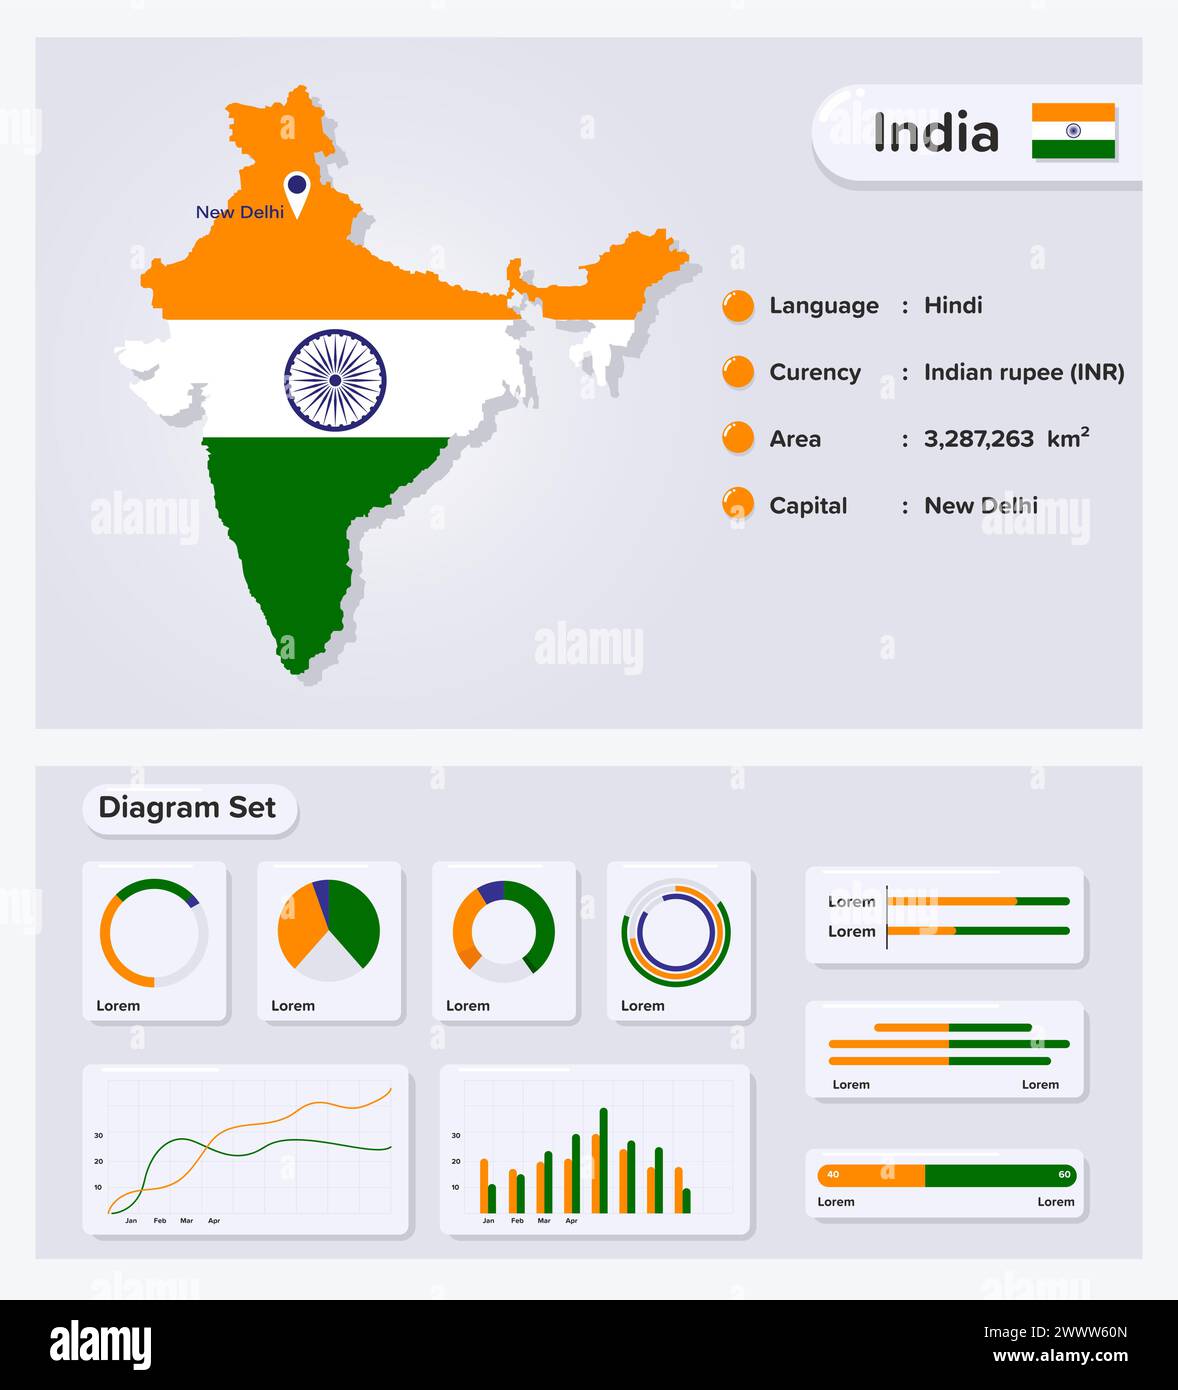 India Infographic Vector Illustration, India Statistical Data Element, Information Board With Flag Map, India Map Flag With Diagram Set Flat Design Stock Vector